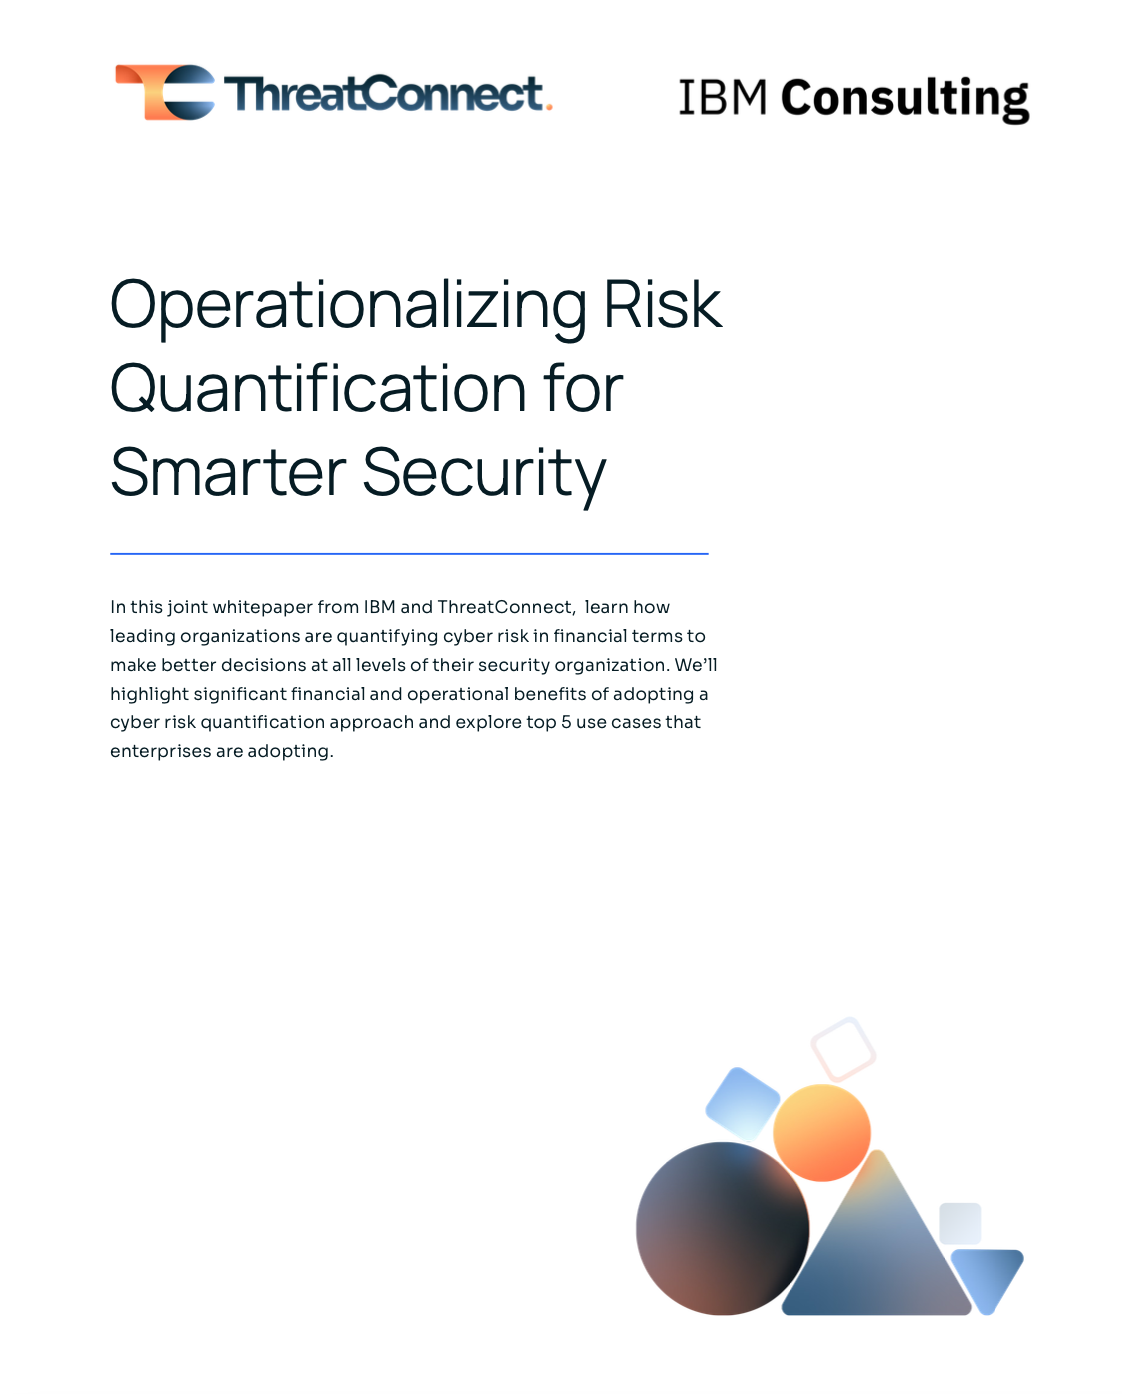 Operationalizing Cyber risk quantification process by IBM and ThreatConnect